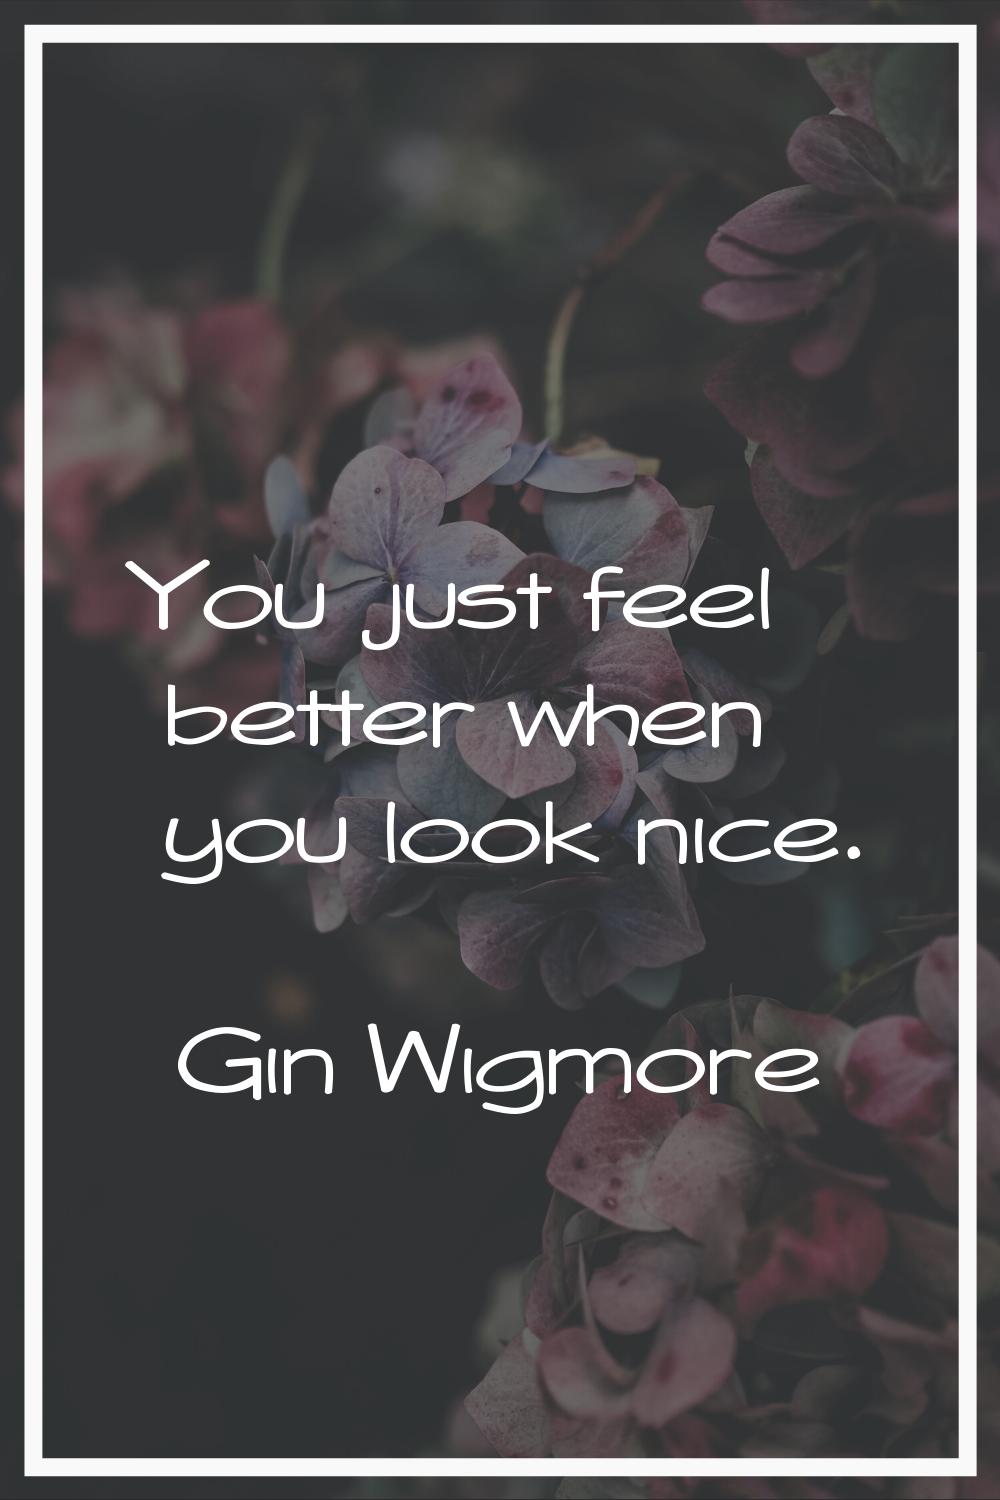 You just feel better when you look nice.